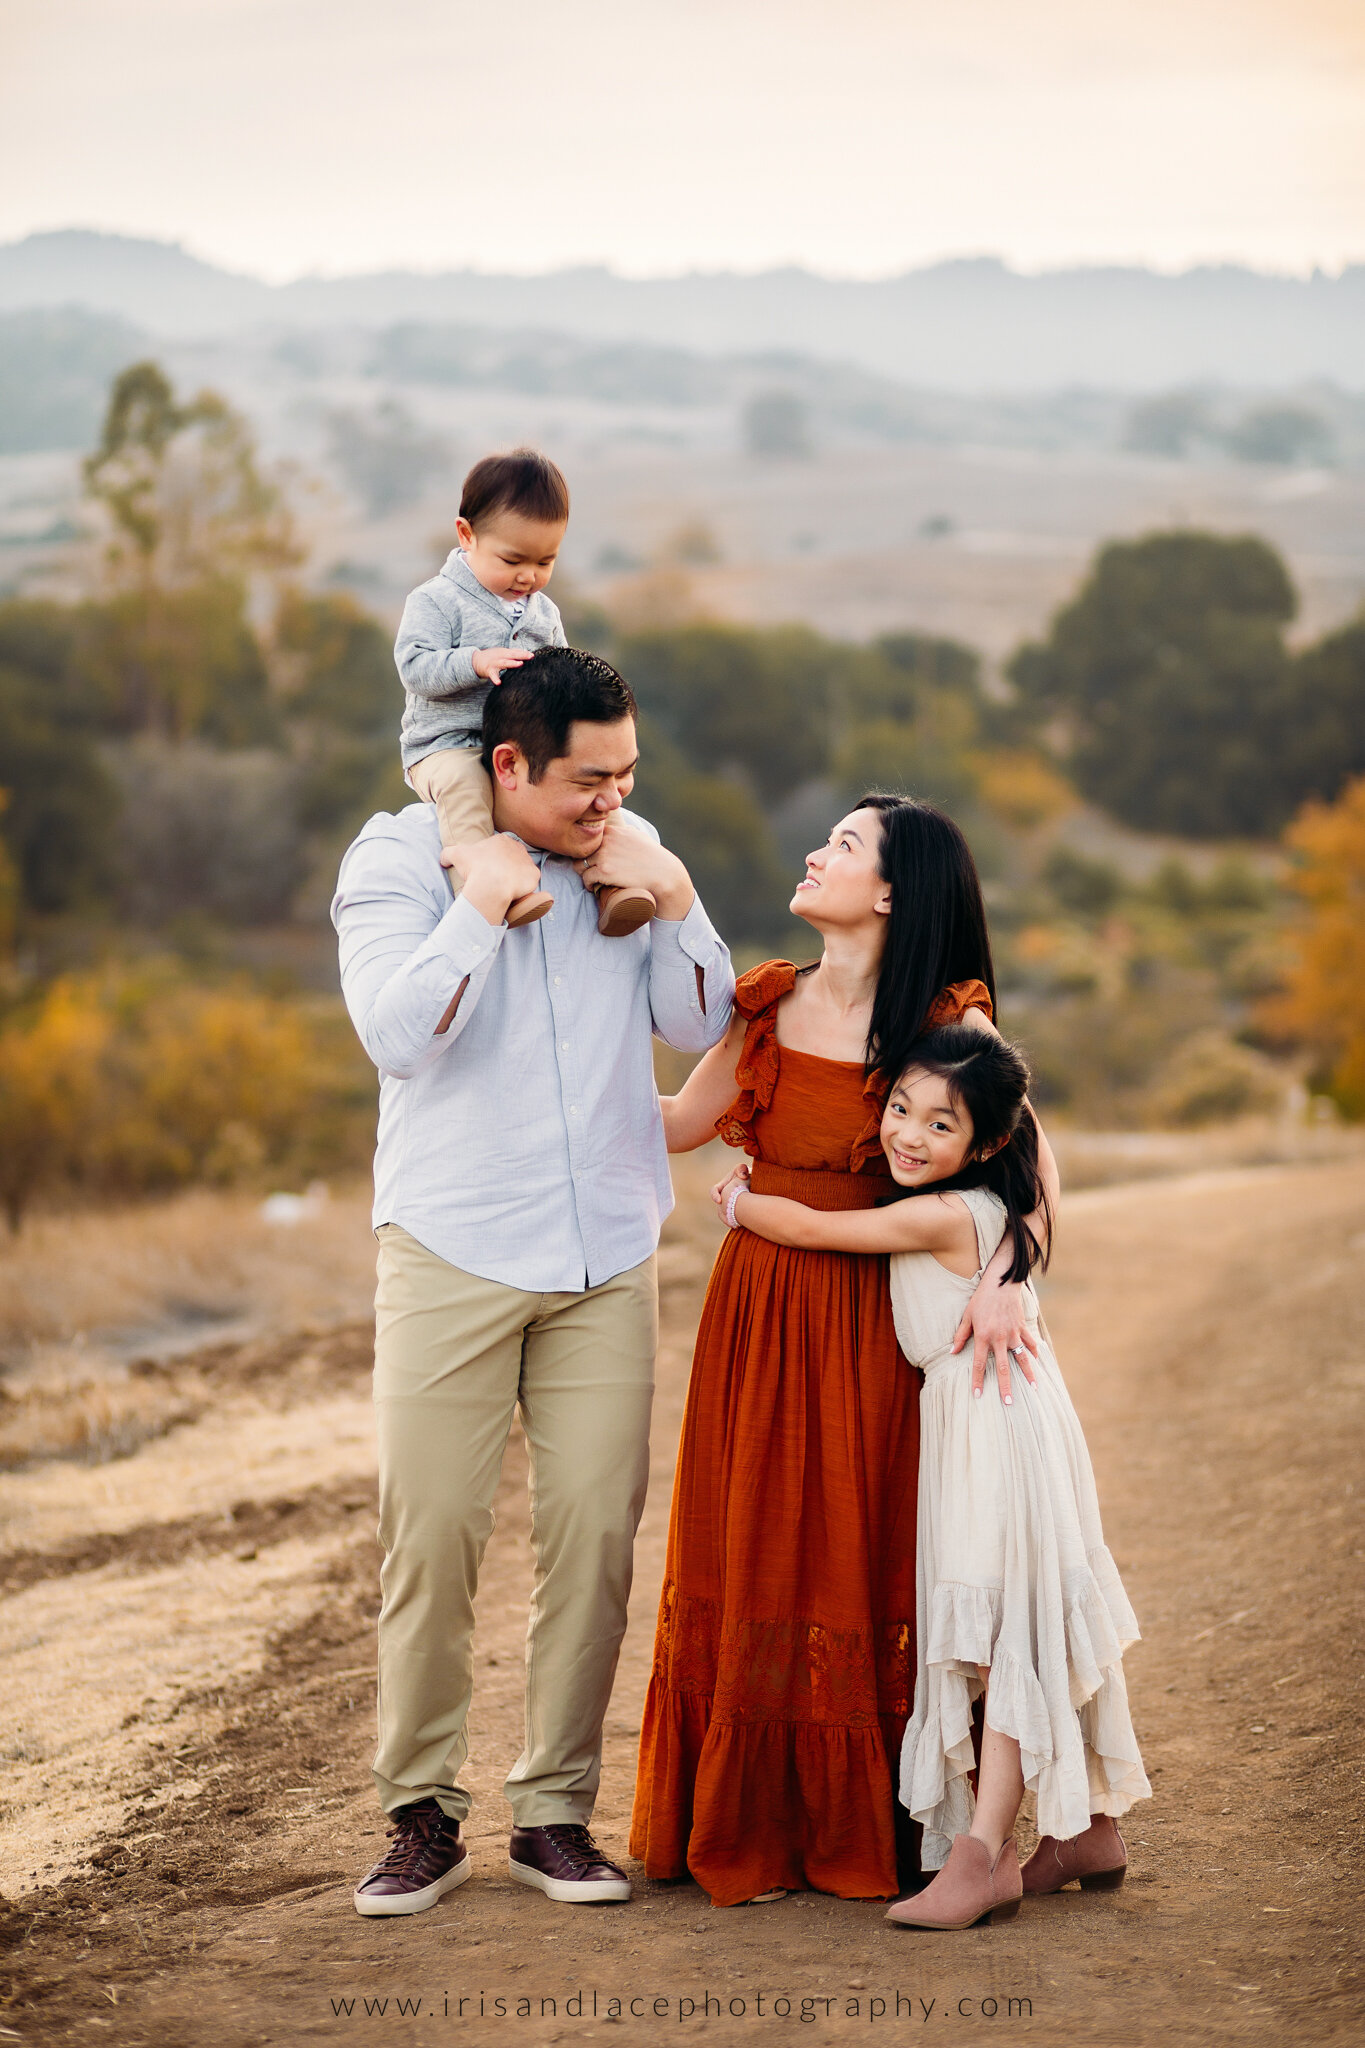 San Francisco Bay Area Family Photography   |   Shot in SF Peninsula by Iris and Lace Photography